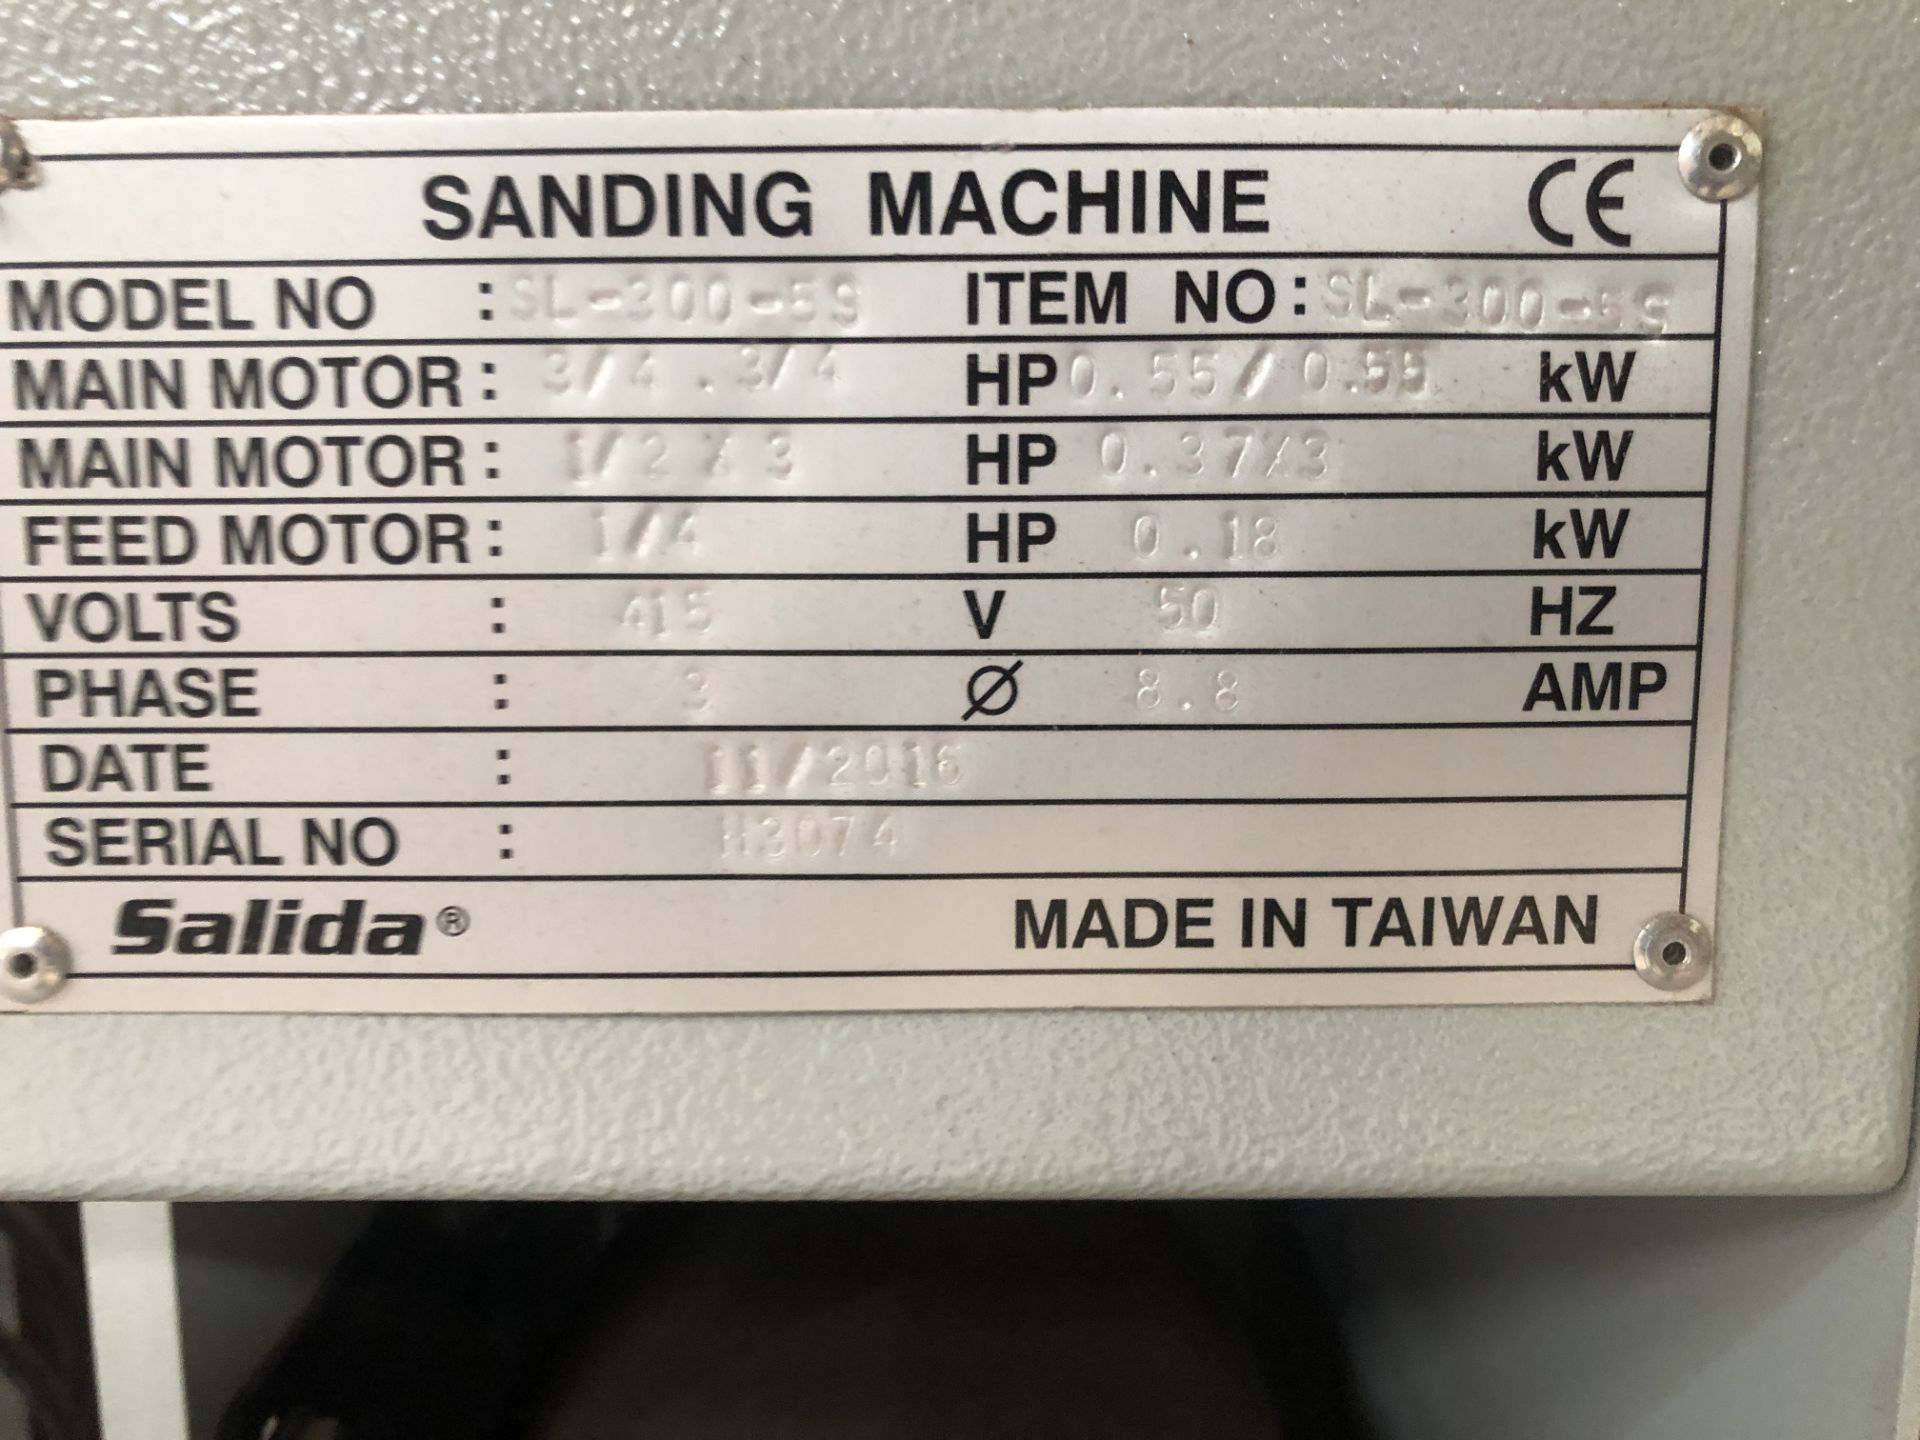 Unosand Model SL/300/55 Sanding Machine Serial No: H3074 (11/2016) 3phase(Please note: Item needs - Image 4 of 16